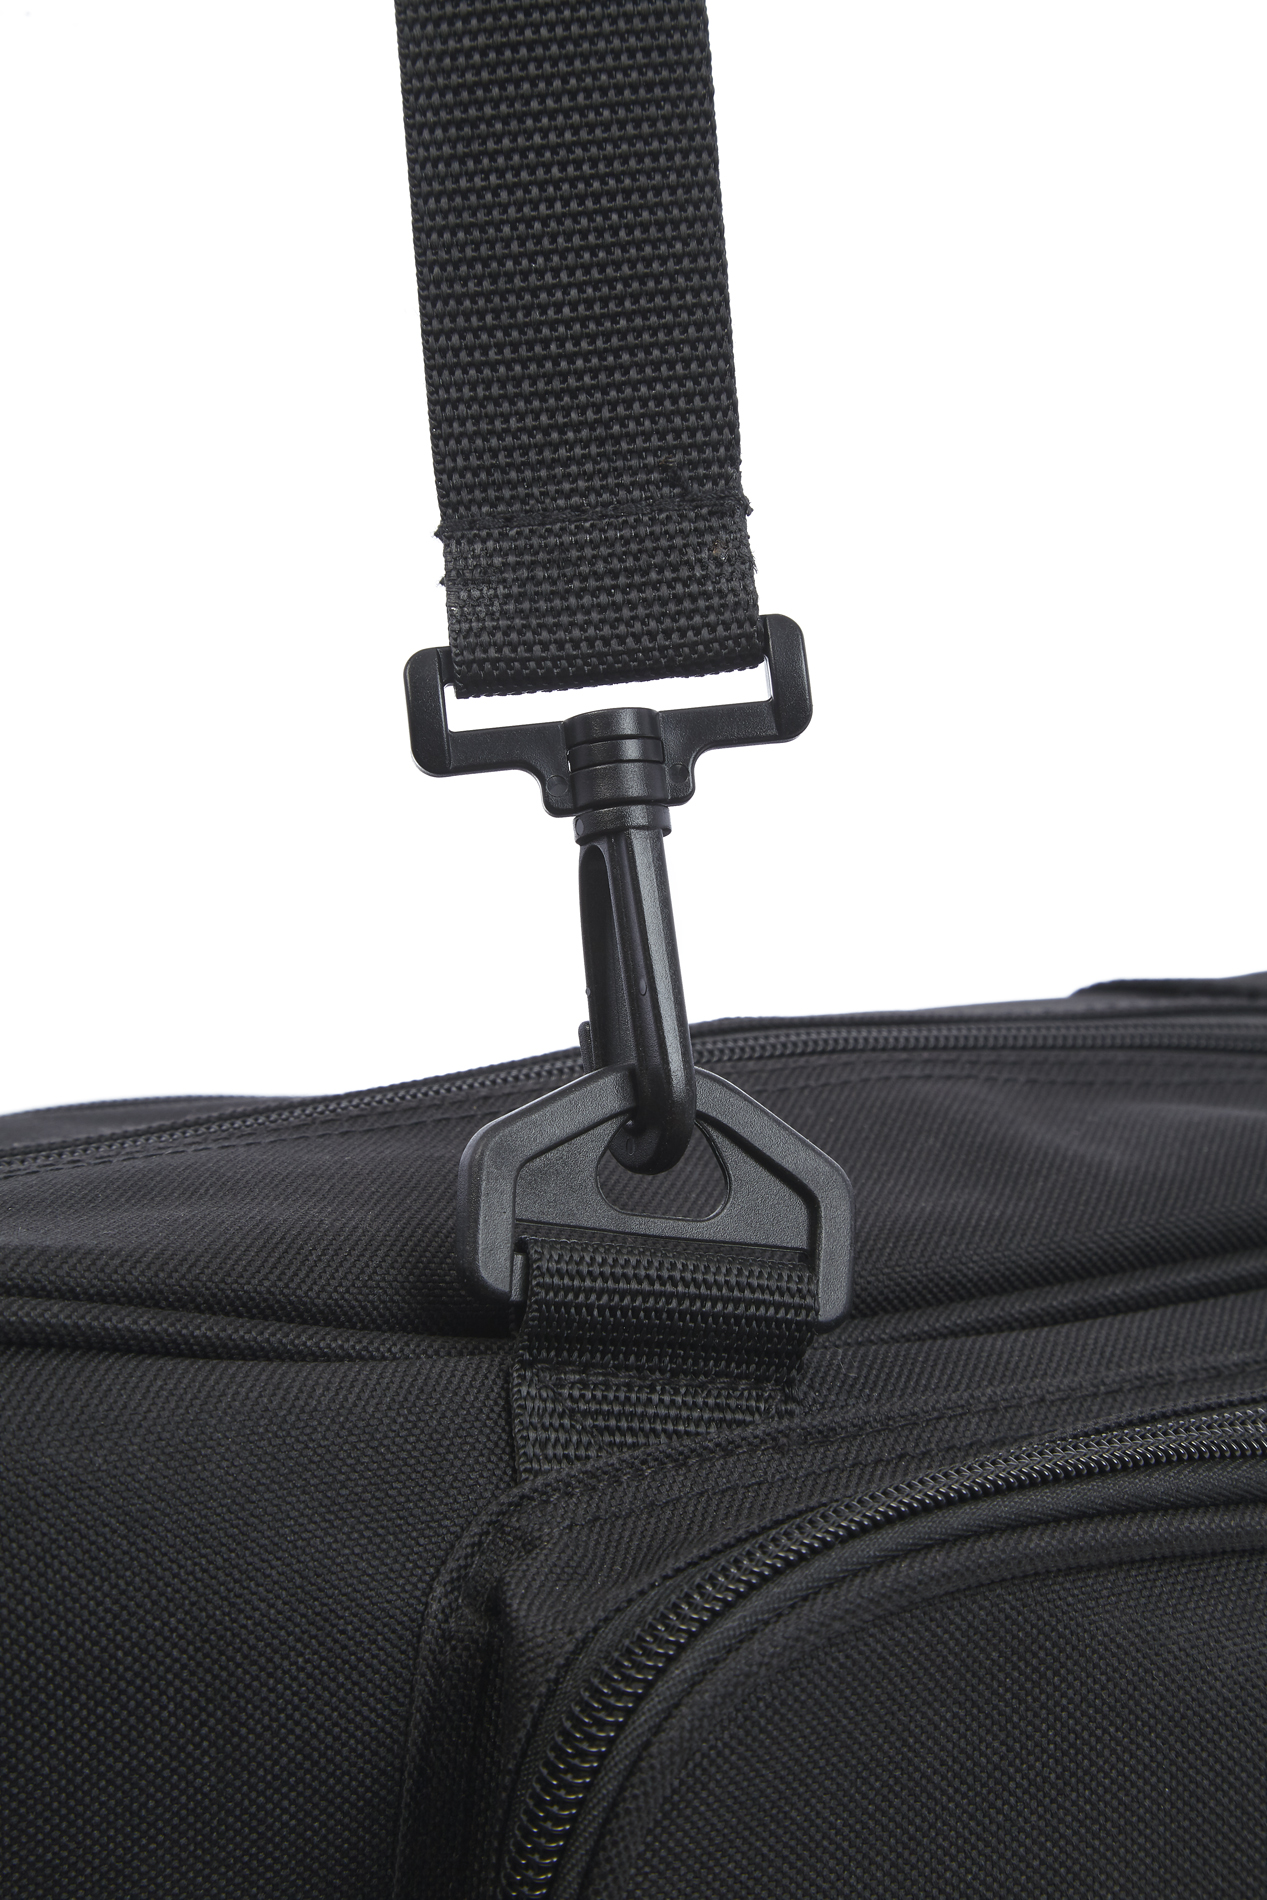 Carry Bag For AVLCD Stand & Vesa Mount